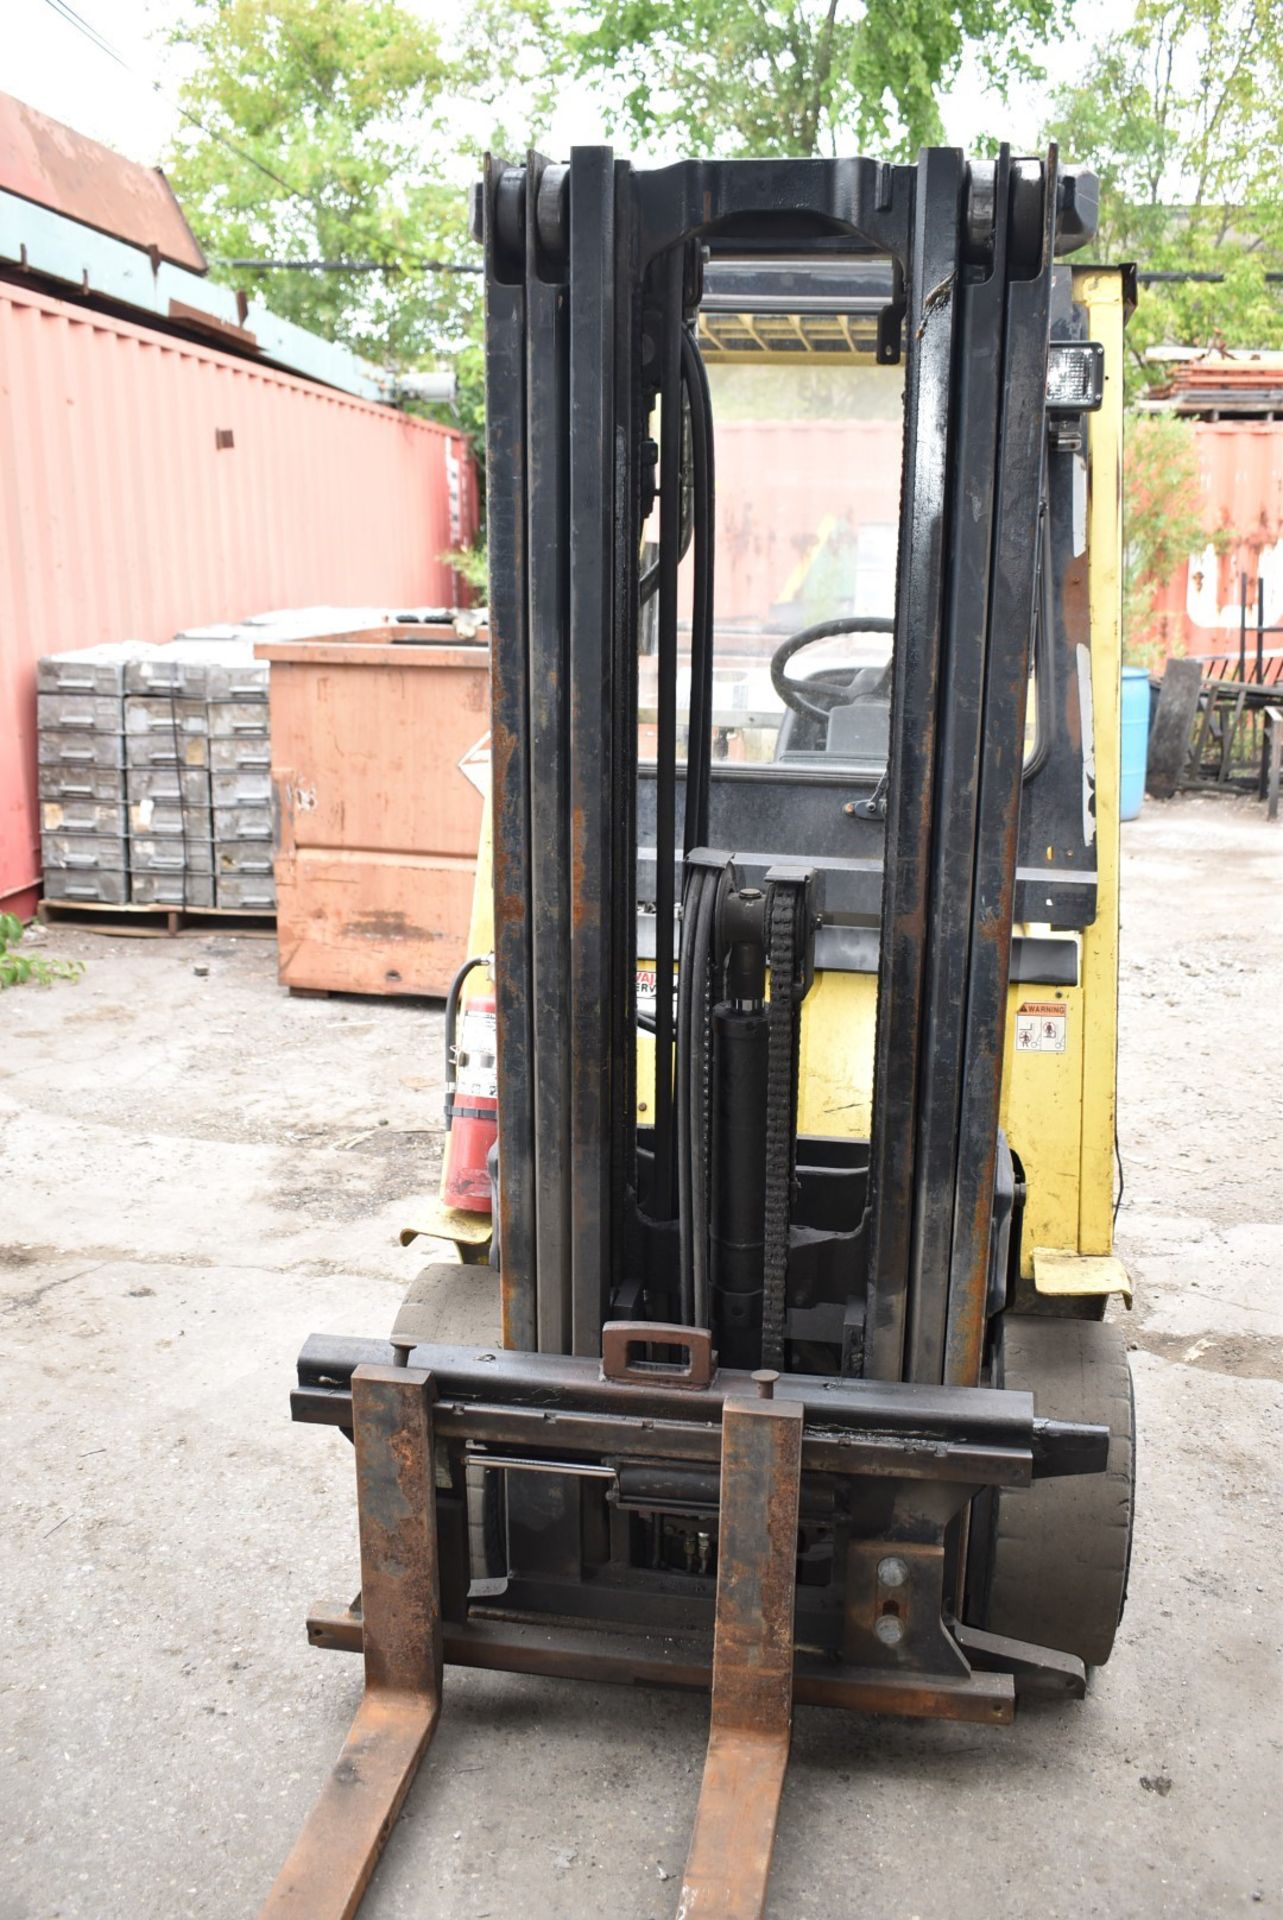 HYSTER S50XM 5,000 LB. CAPACITY LPG FORKLIFT WITH 189" MAX. LIFT HEIGHT, 3-STAGE MAST, SIDE SHIFT, - Image 14 of 16